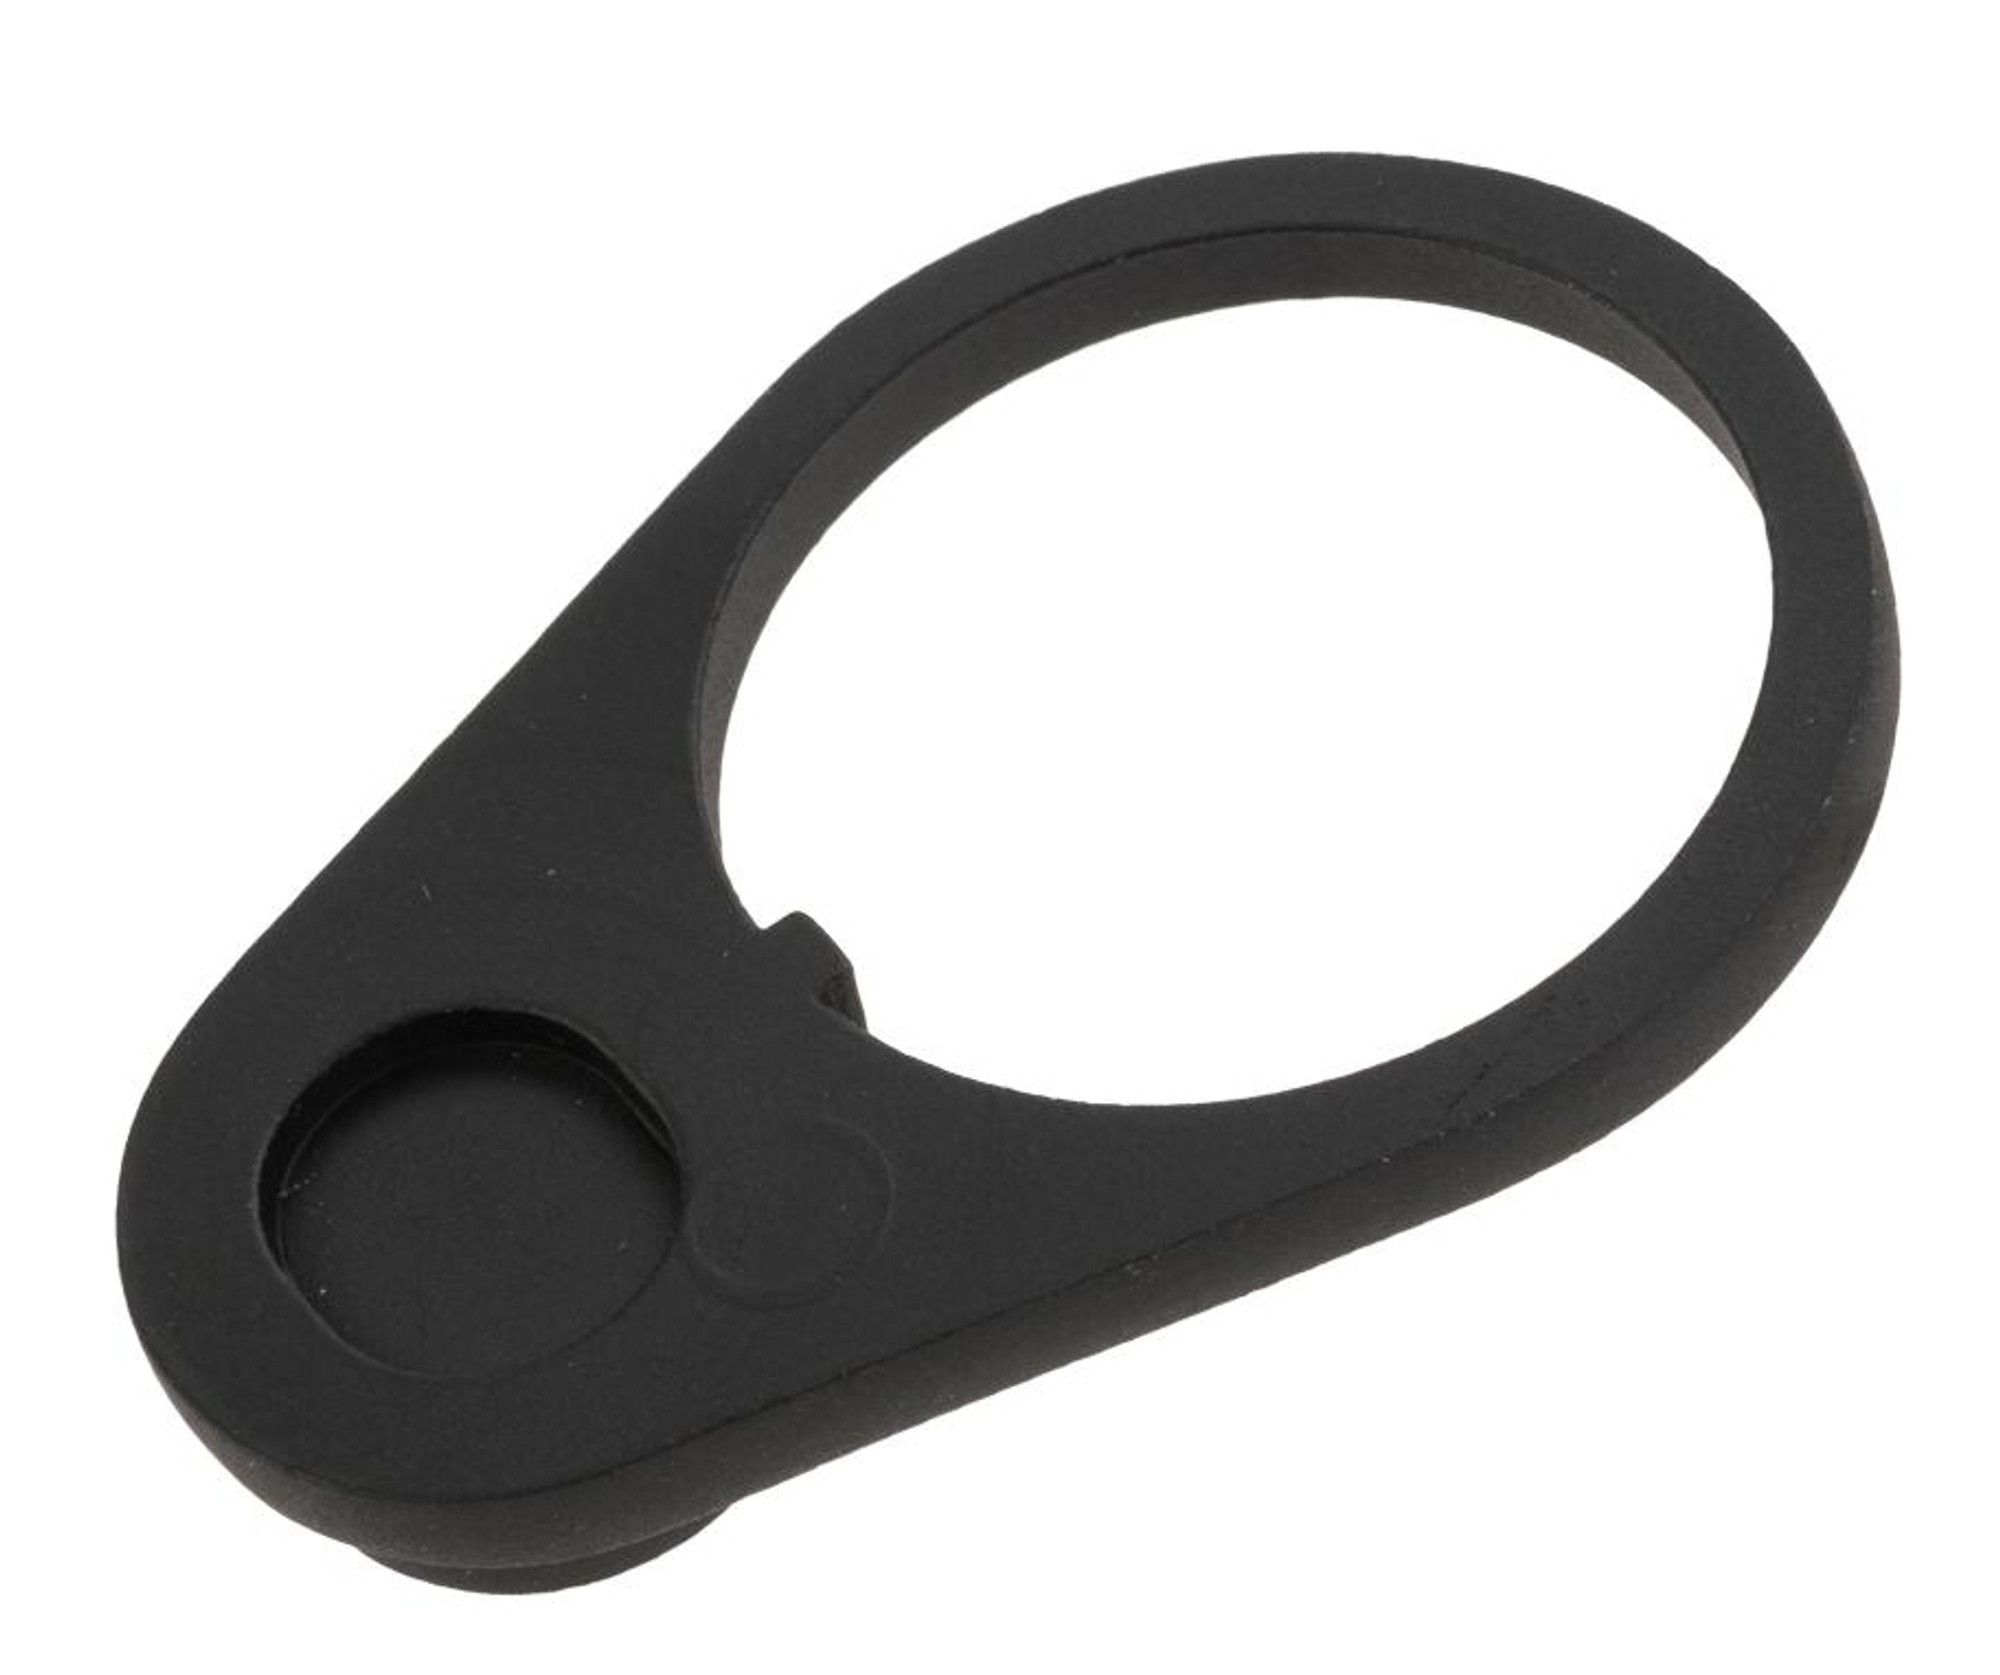 S&T Replacement Stock Ring for M4 / M16 Series Airsoft GBB Rifles